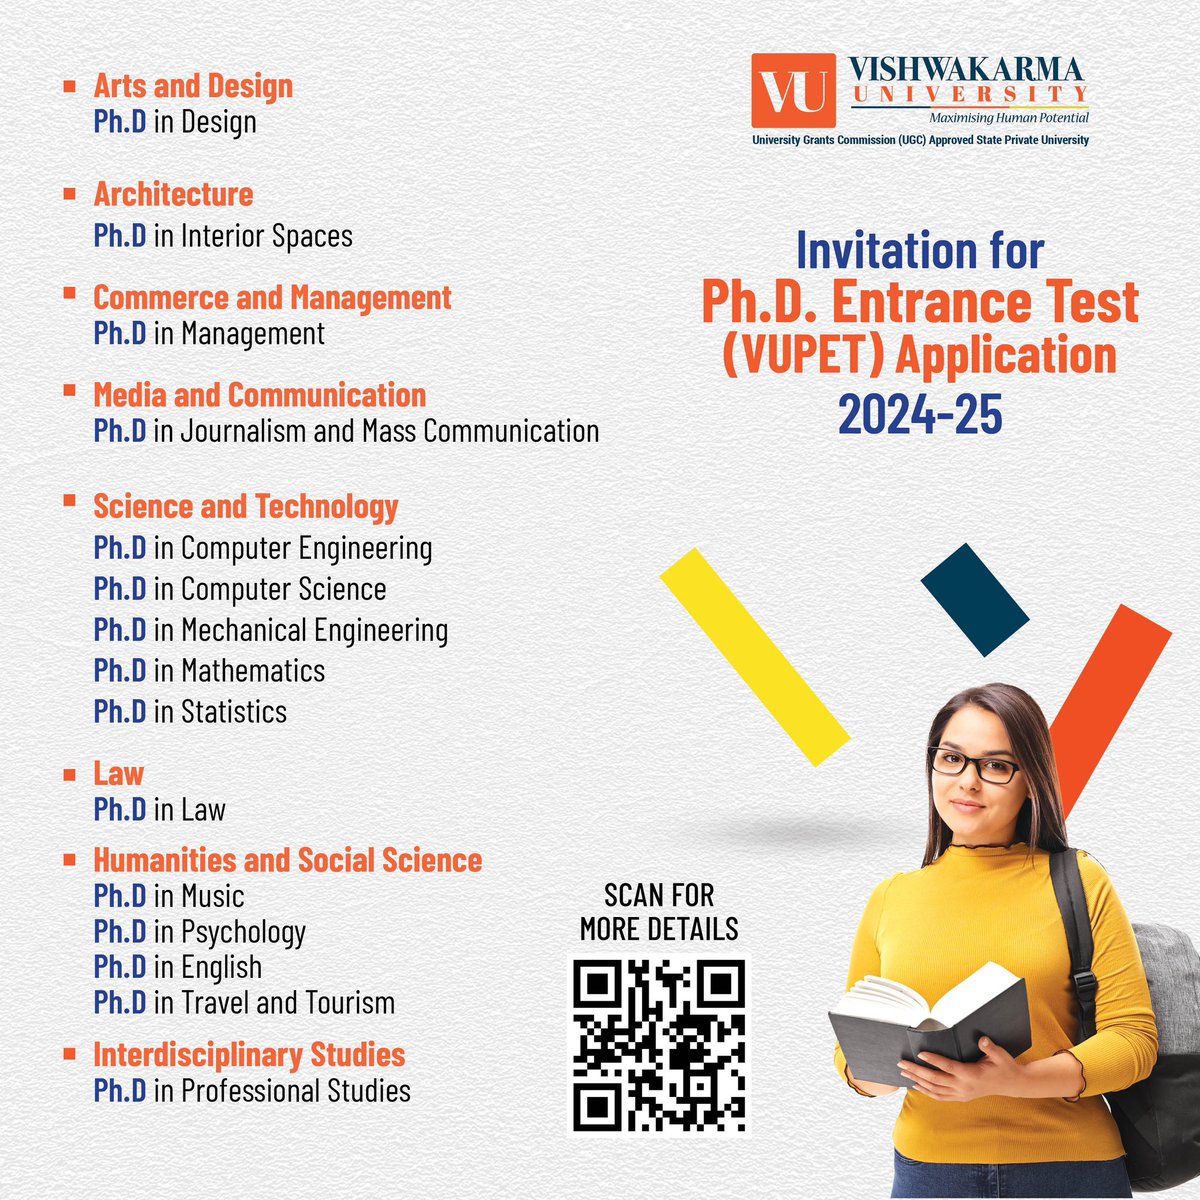 Applications for the Vishwakarma University Ph.D Entrance Test (VUPET) for the 2024-25 batch are now OPEN! Click the link below to learn more about Ph.D admissions. 
vupune.ac.in/academicss/phd…
#VUPET #PhDAdmissions #ResearchOpportunity #AcademicExcellence